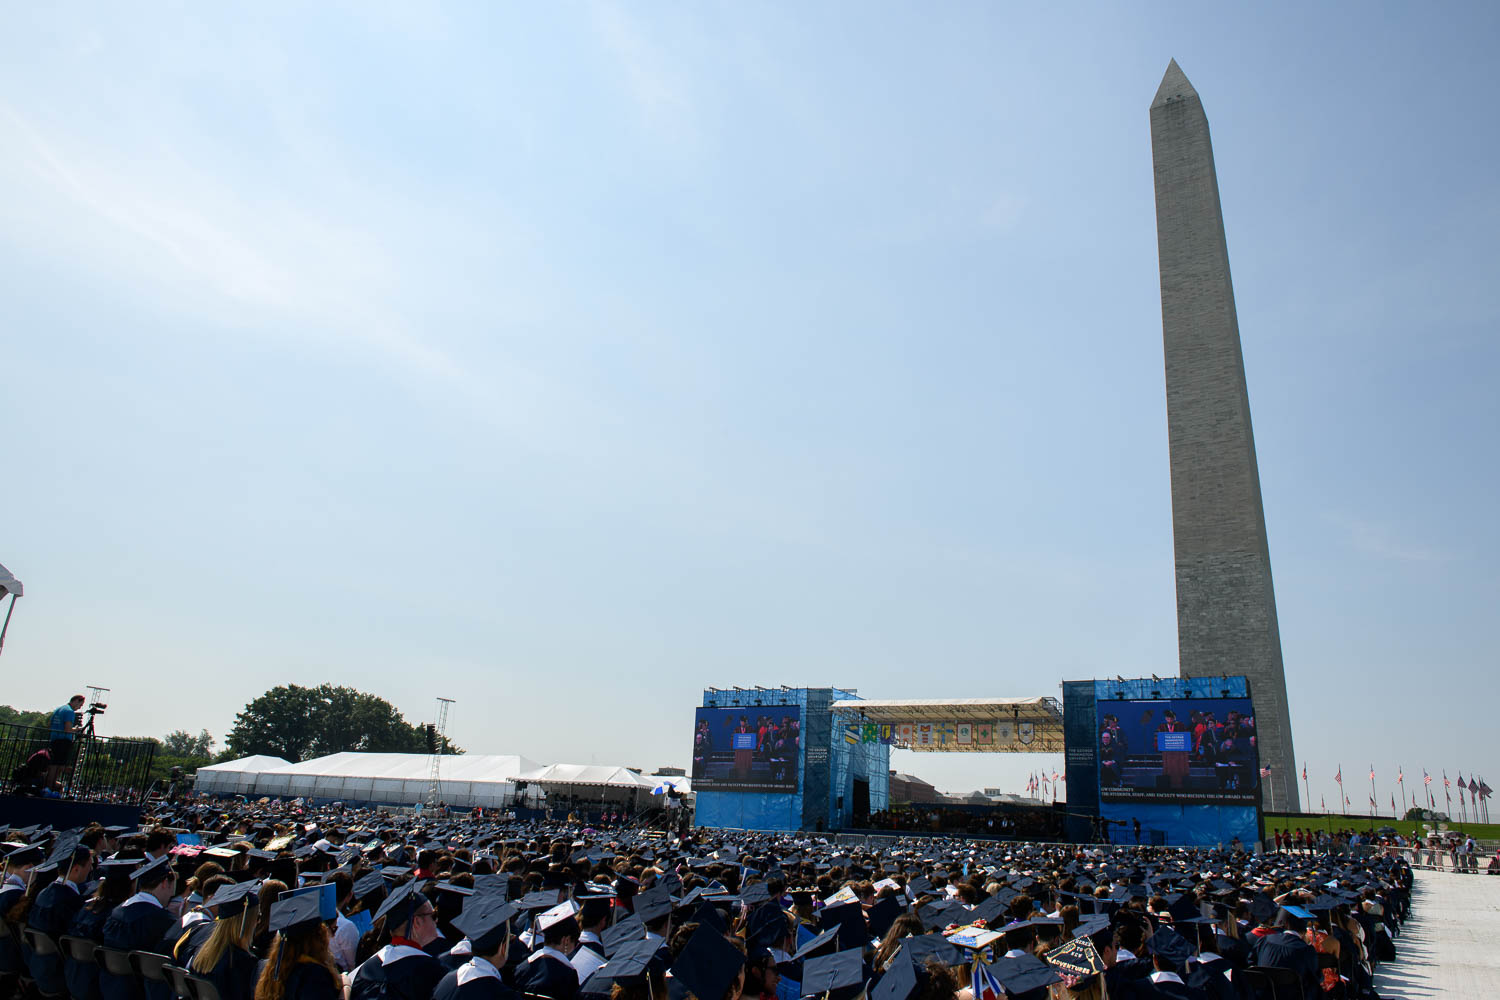 Washington Monument in background of Commencement stage with Guthrie speaking at podium